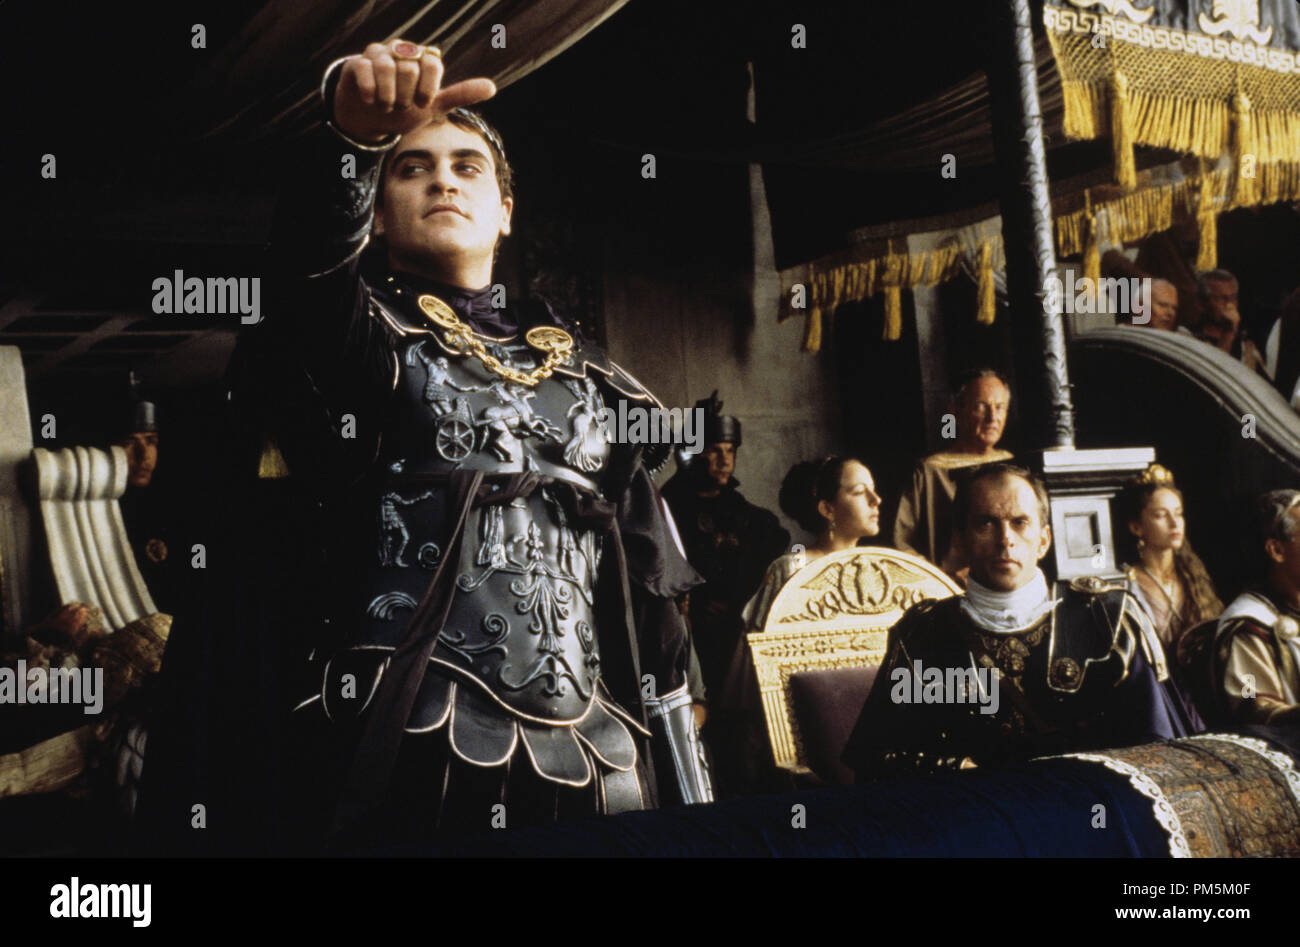 Film Still / Publicity Stills from 'Gladiator' Joaquin Phoenix © 2000 Universal  Photo Credit: Jaap Buitendijk   File Reference # 30846509THA  For Editorial Use Only -  All Rights Reserved Stock Photo